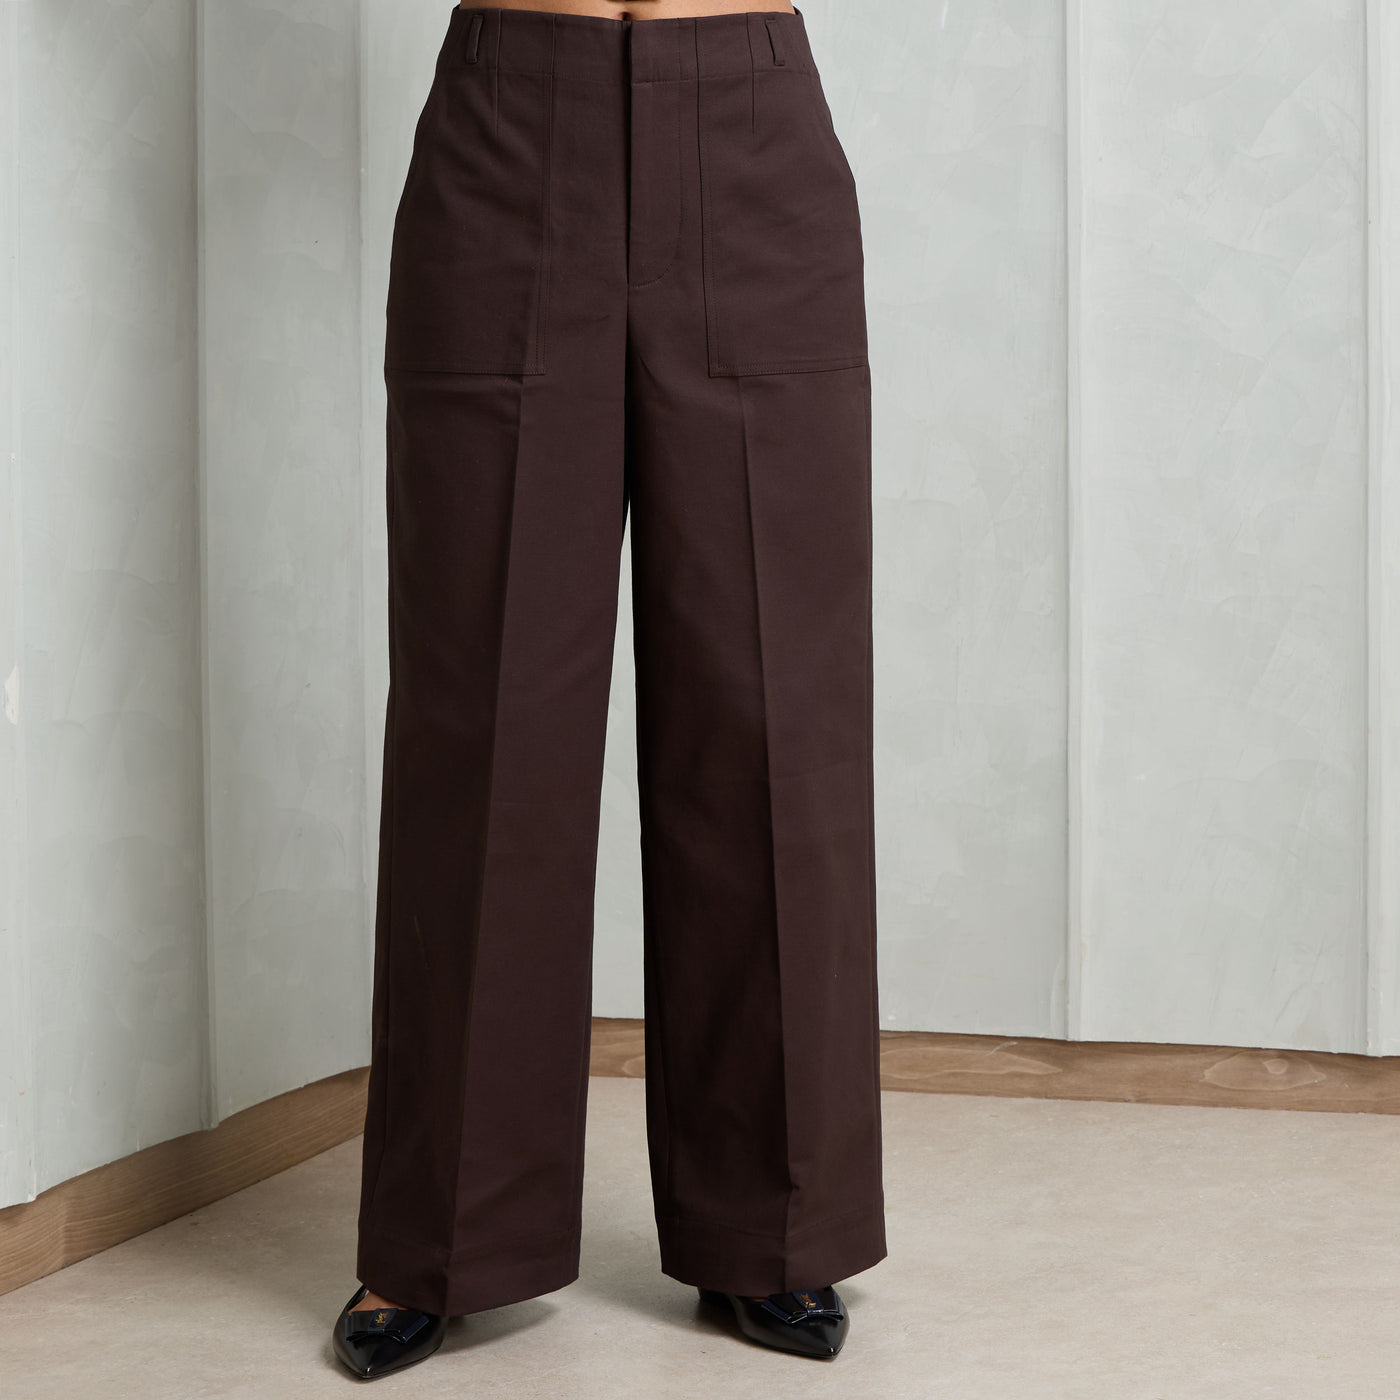 BHAANE bown wide legged trousers